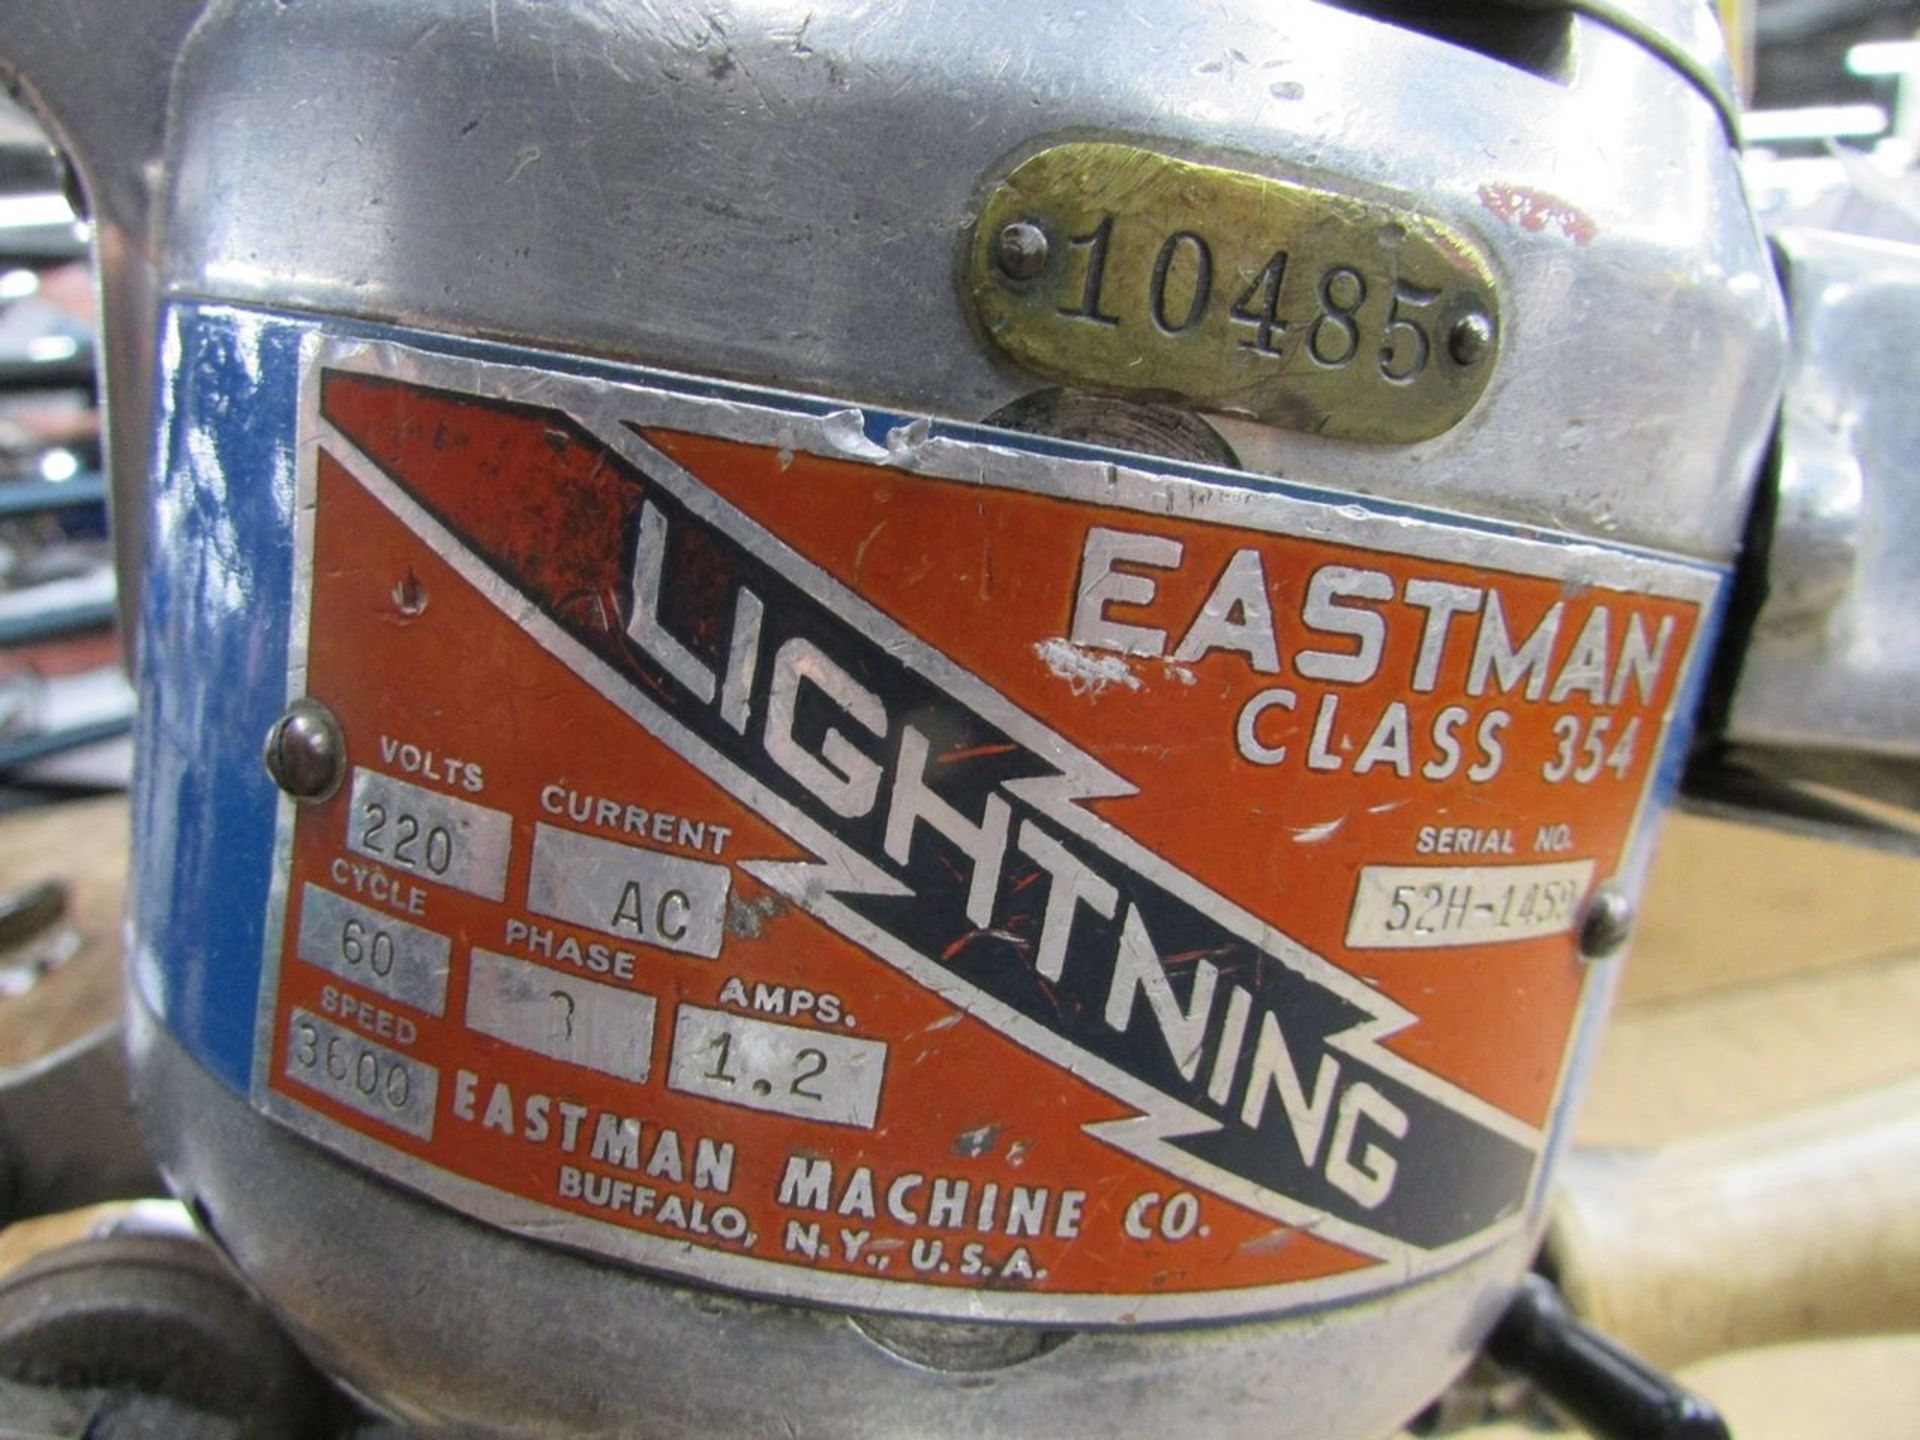 Eastman Model 354 5" Rotary Cloth Cutter - Image 5 of 5